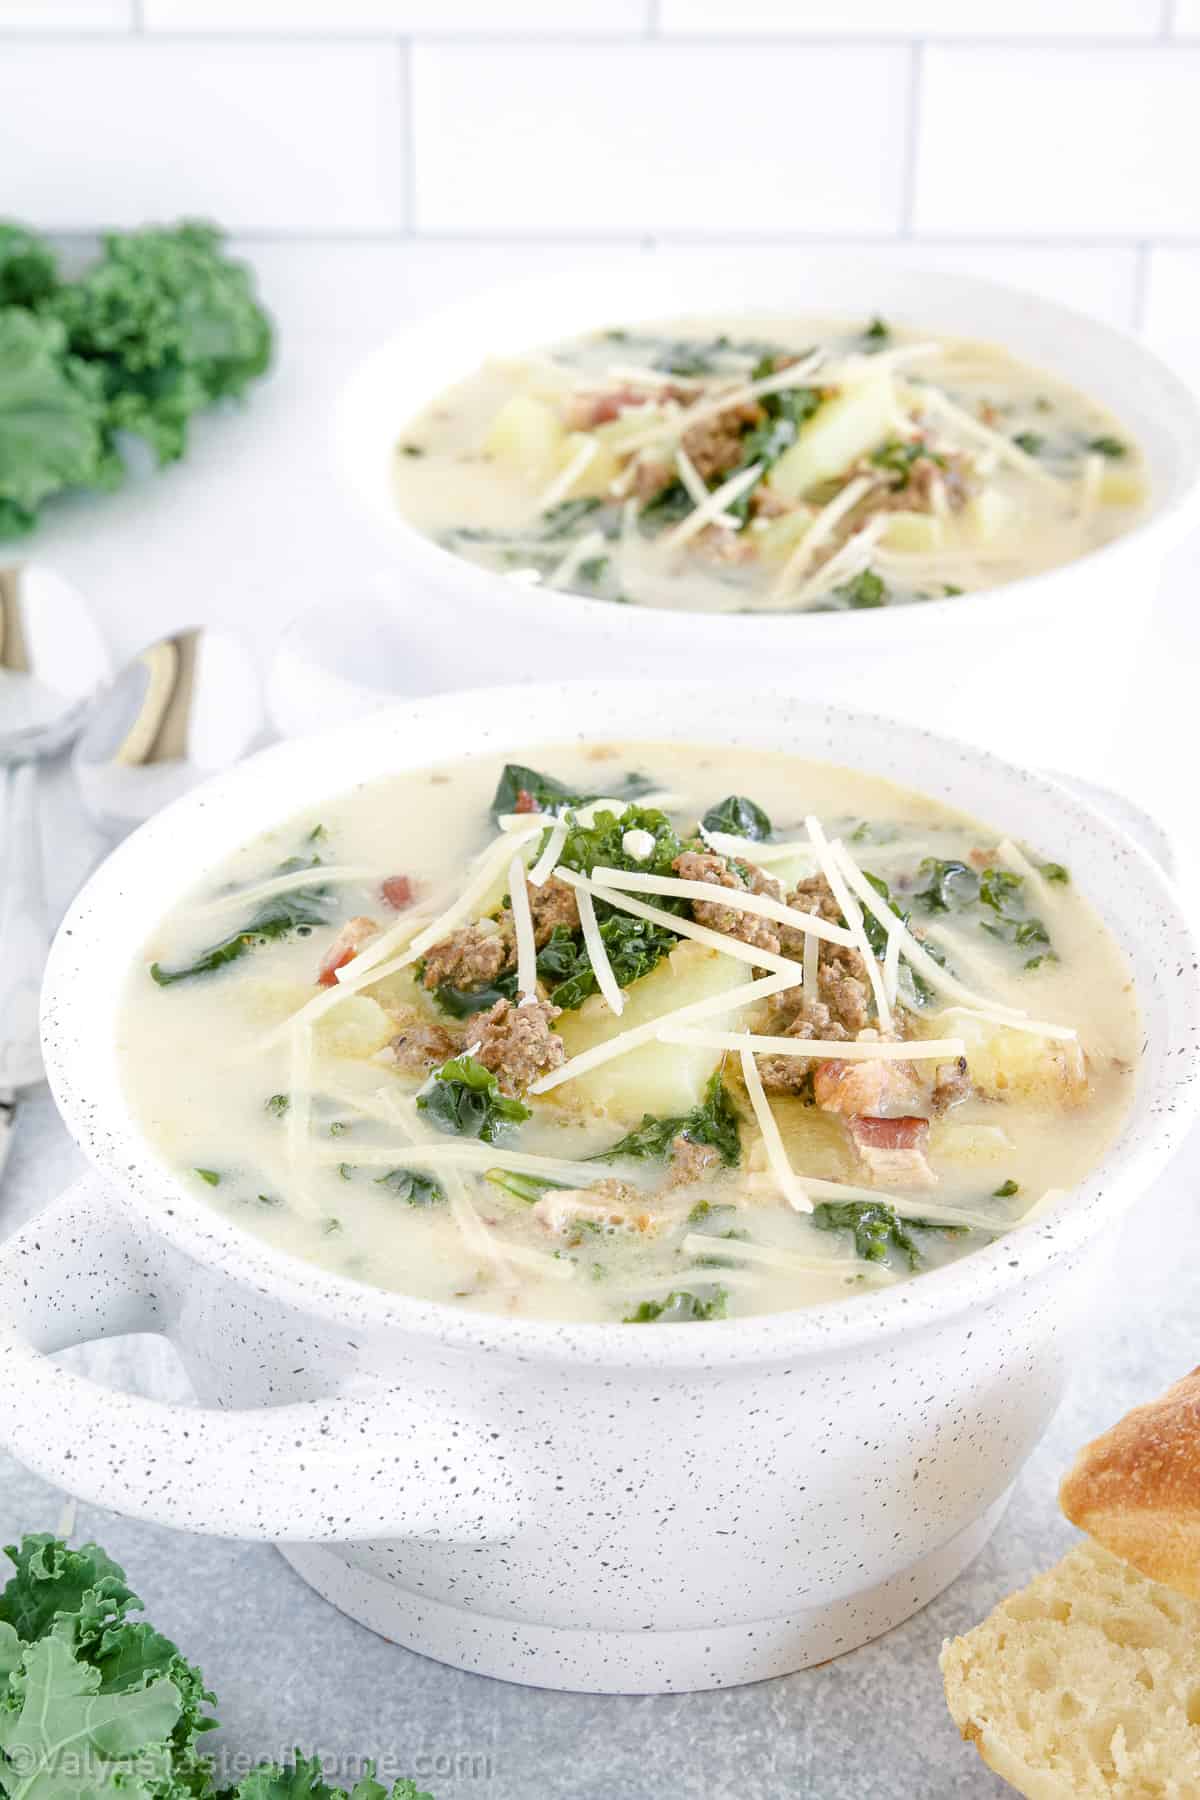 This delicious Zuppa Toscana is made using tasty ground beef with sausage seasonings, kale, bacon, and potatoes for an incredibly delectable and hearty Italian soup.